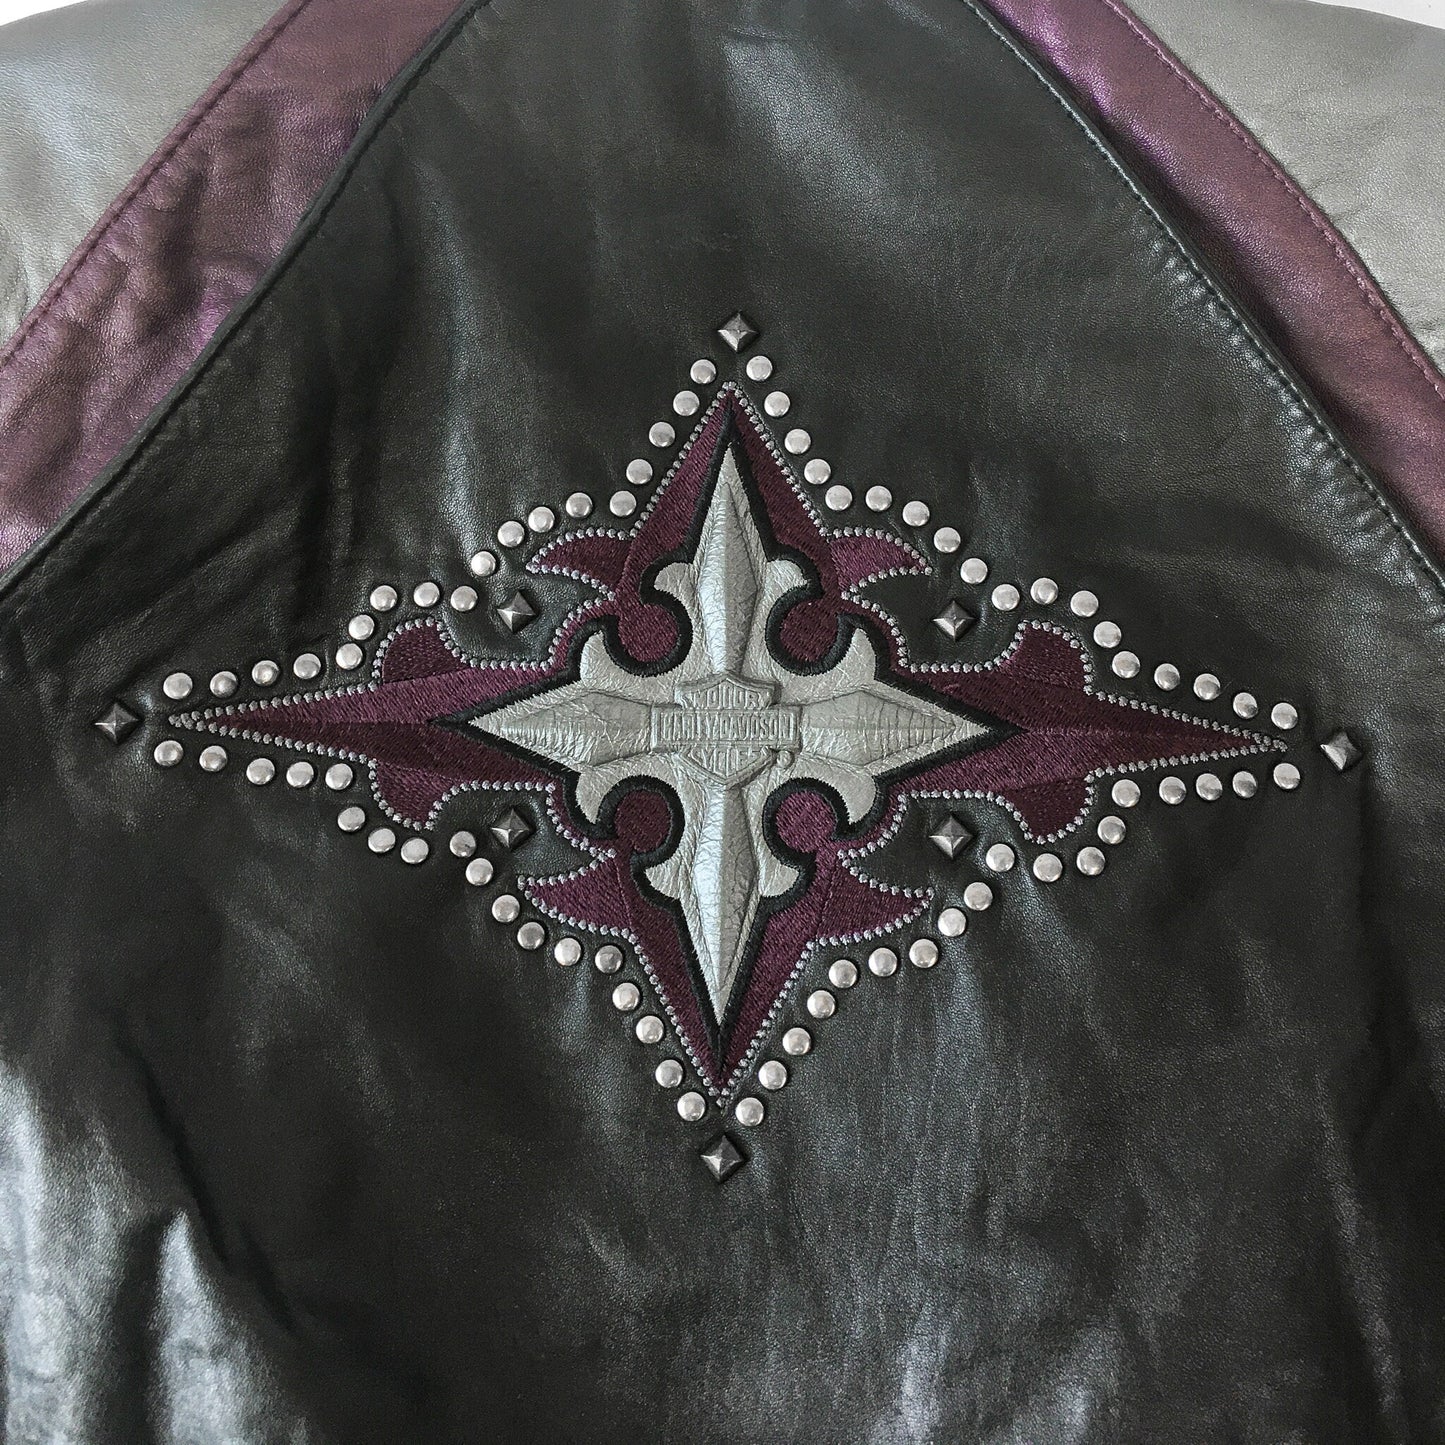 Vintage Harley Davidson Gray and Purple Leather Bomber Jacket with Studded and Embroidered Details, Sz. S/M